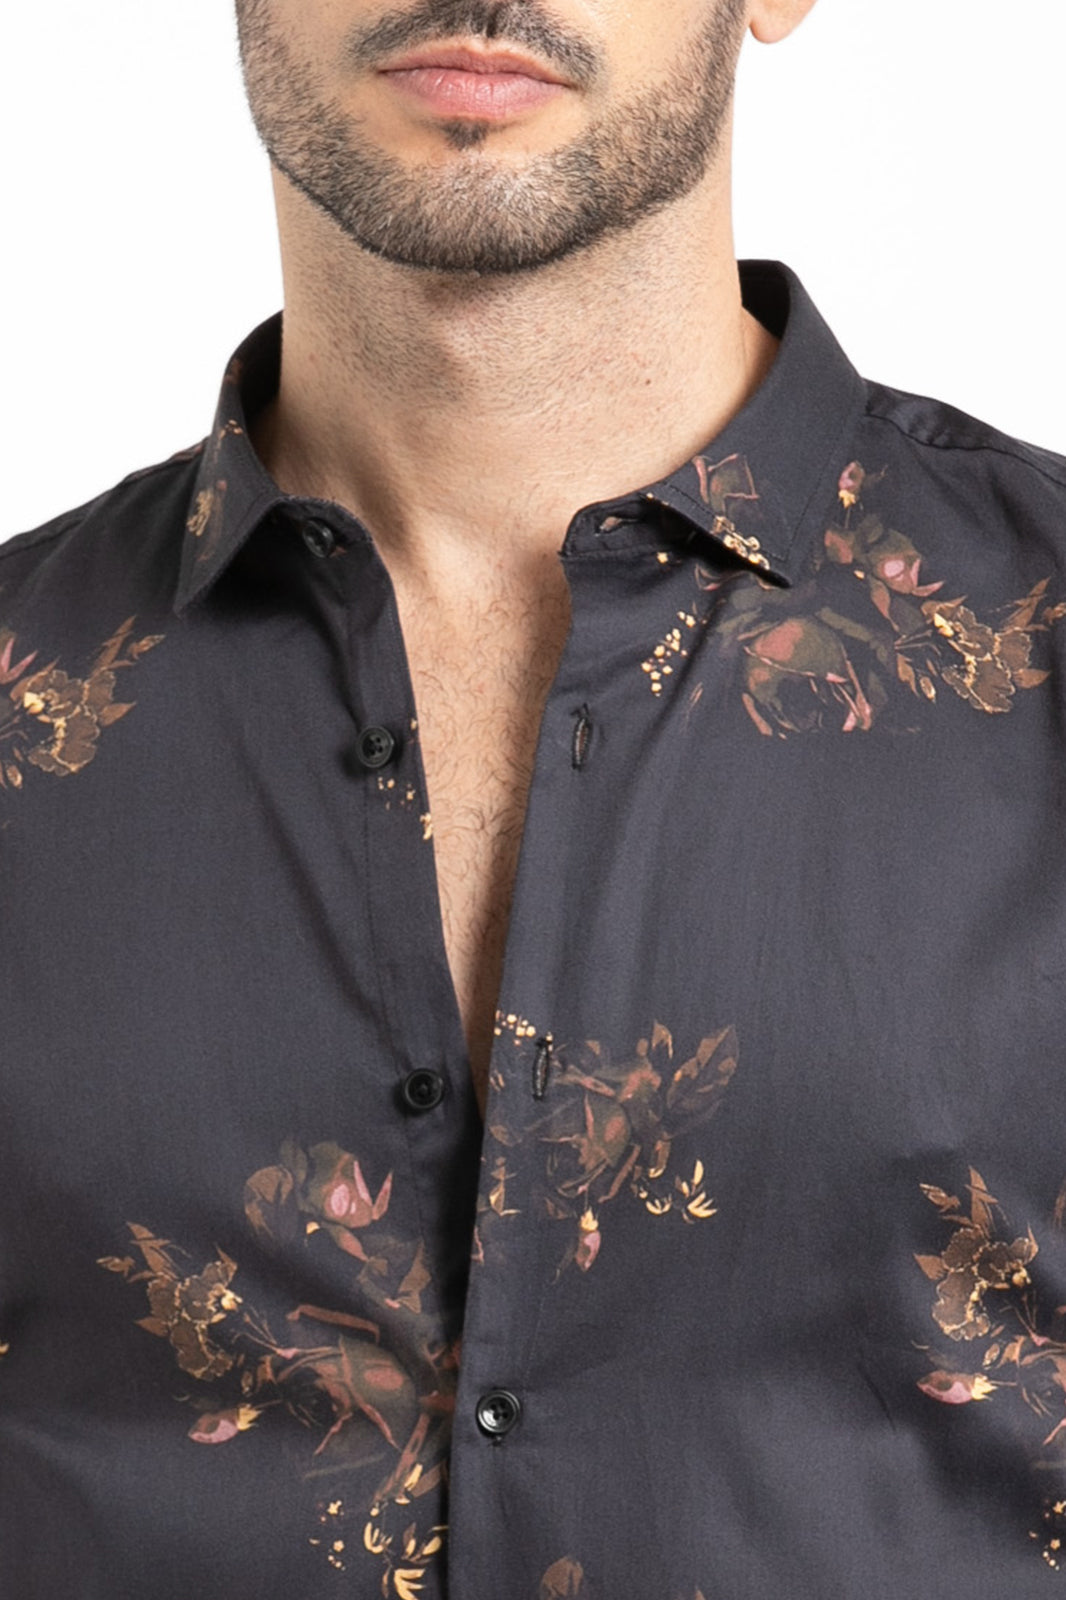 Get Pansy Floral Printed Shirts